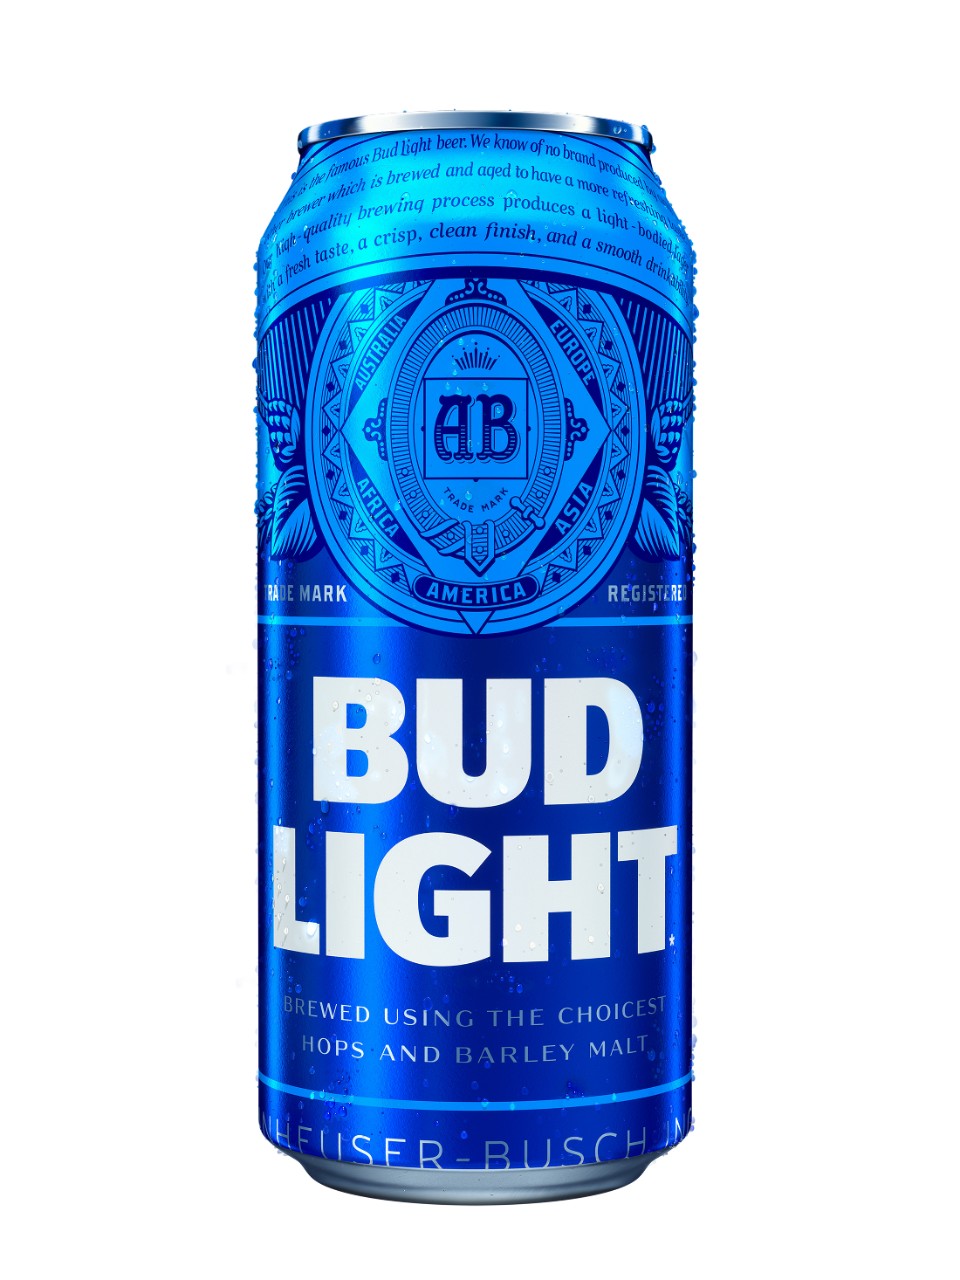 bud-light-beer-8-pack-beer-16-fl-oz-cans-4-2-abv-free-nude-porn-photos